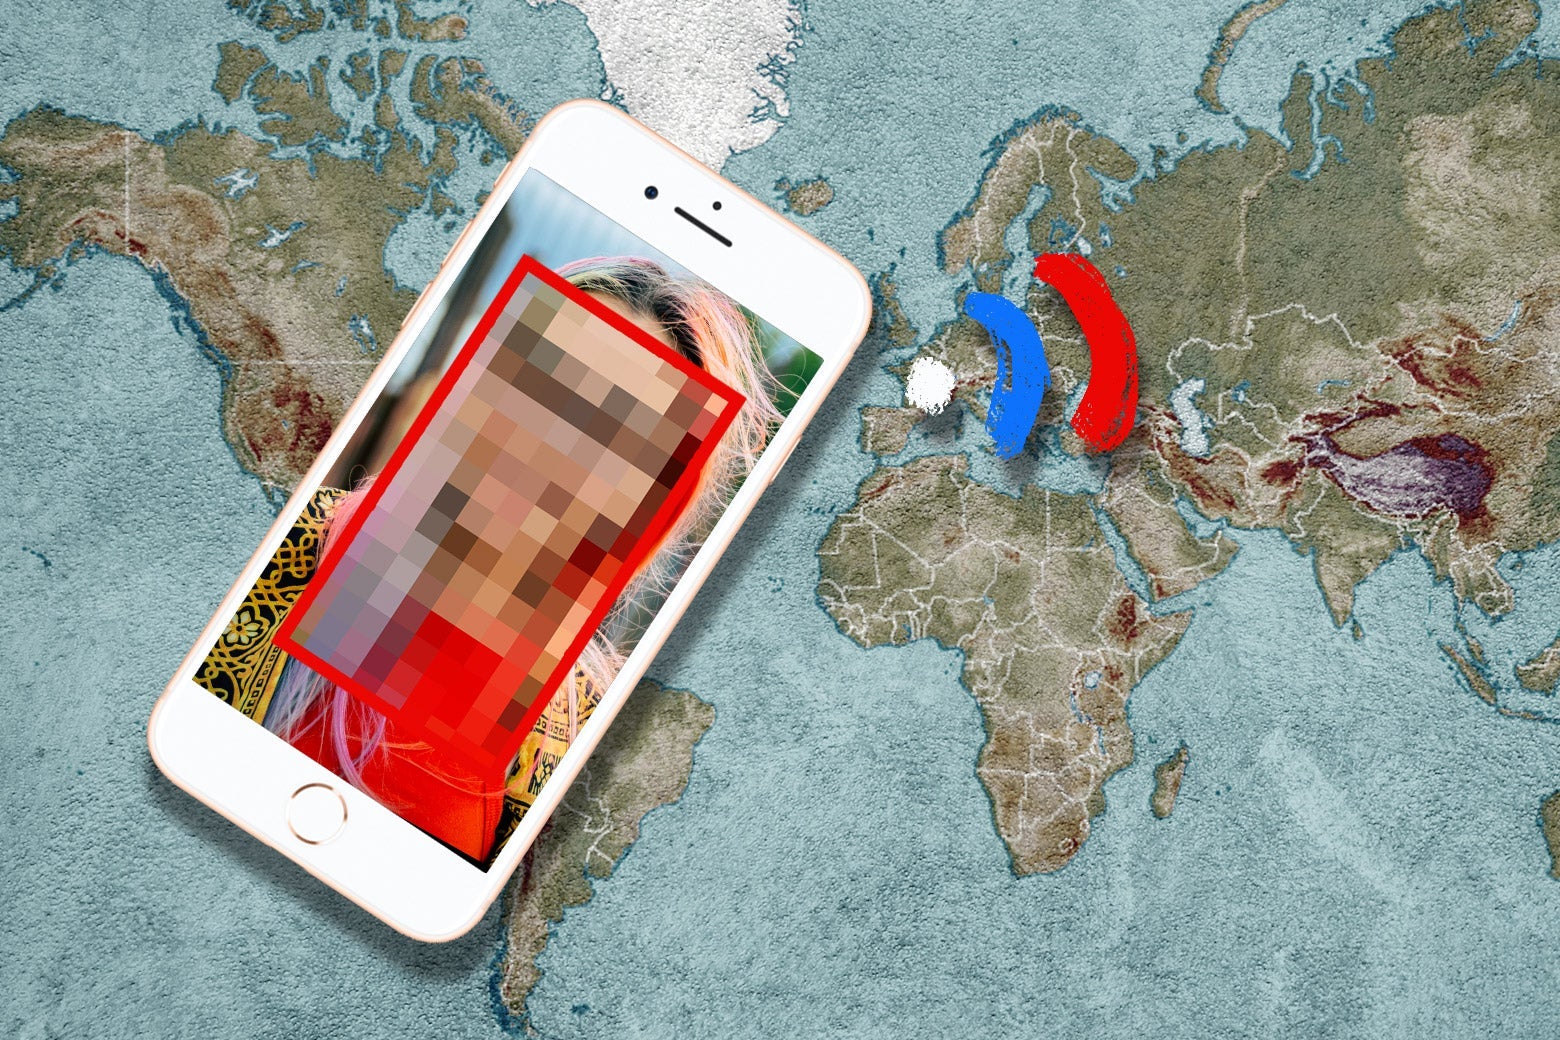 Photo illustration of a blurred out face on a smartphone screen broadcasting to Russia.